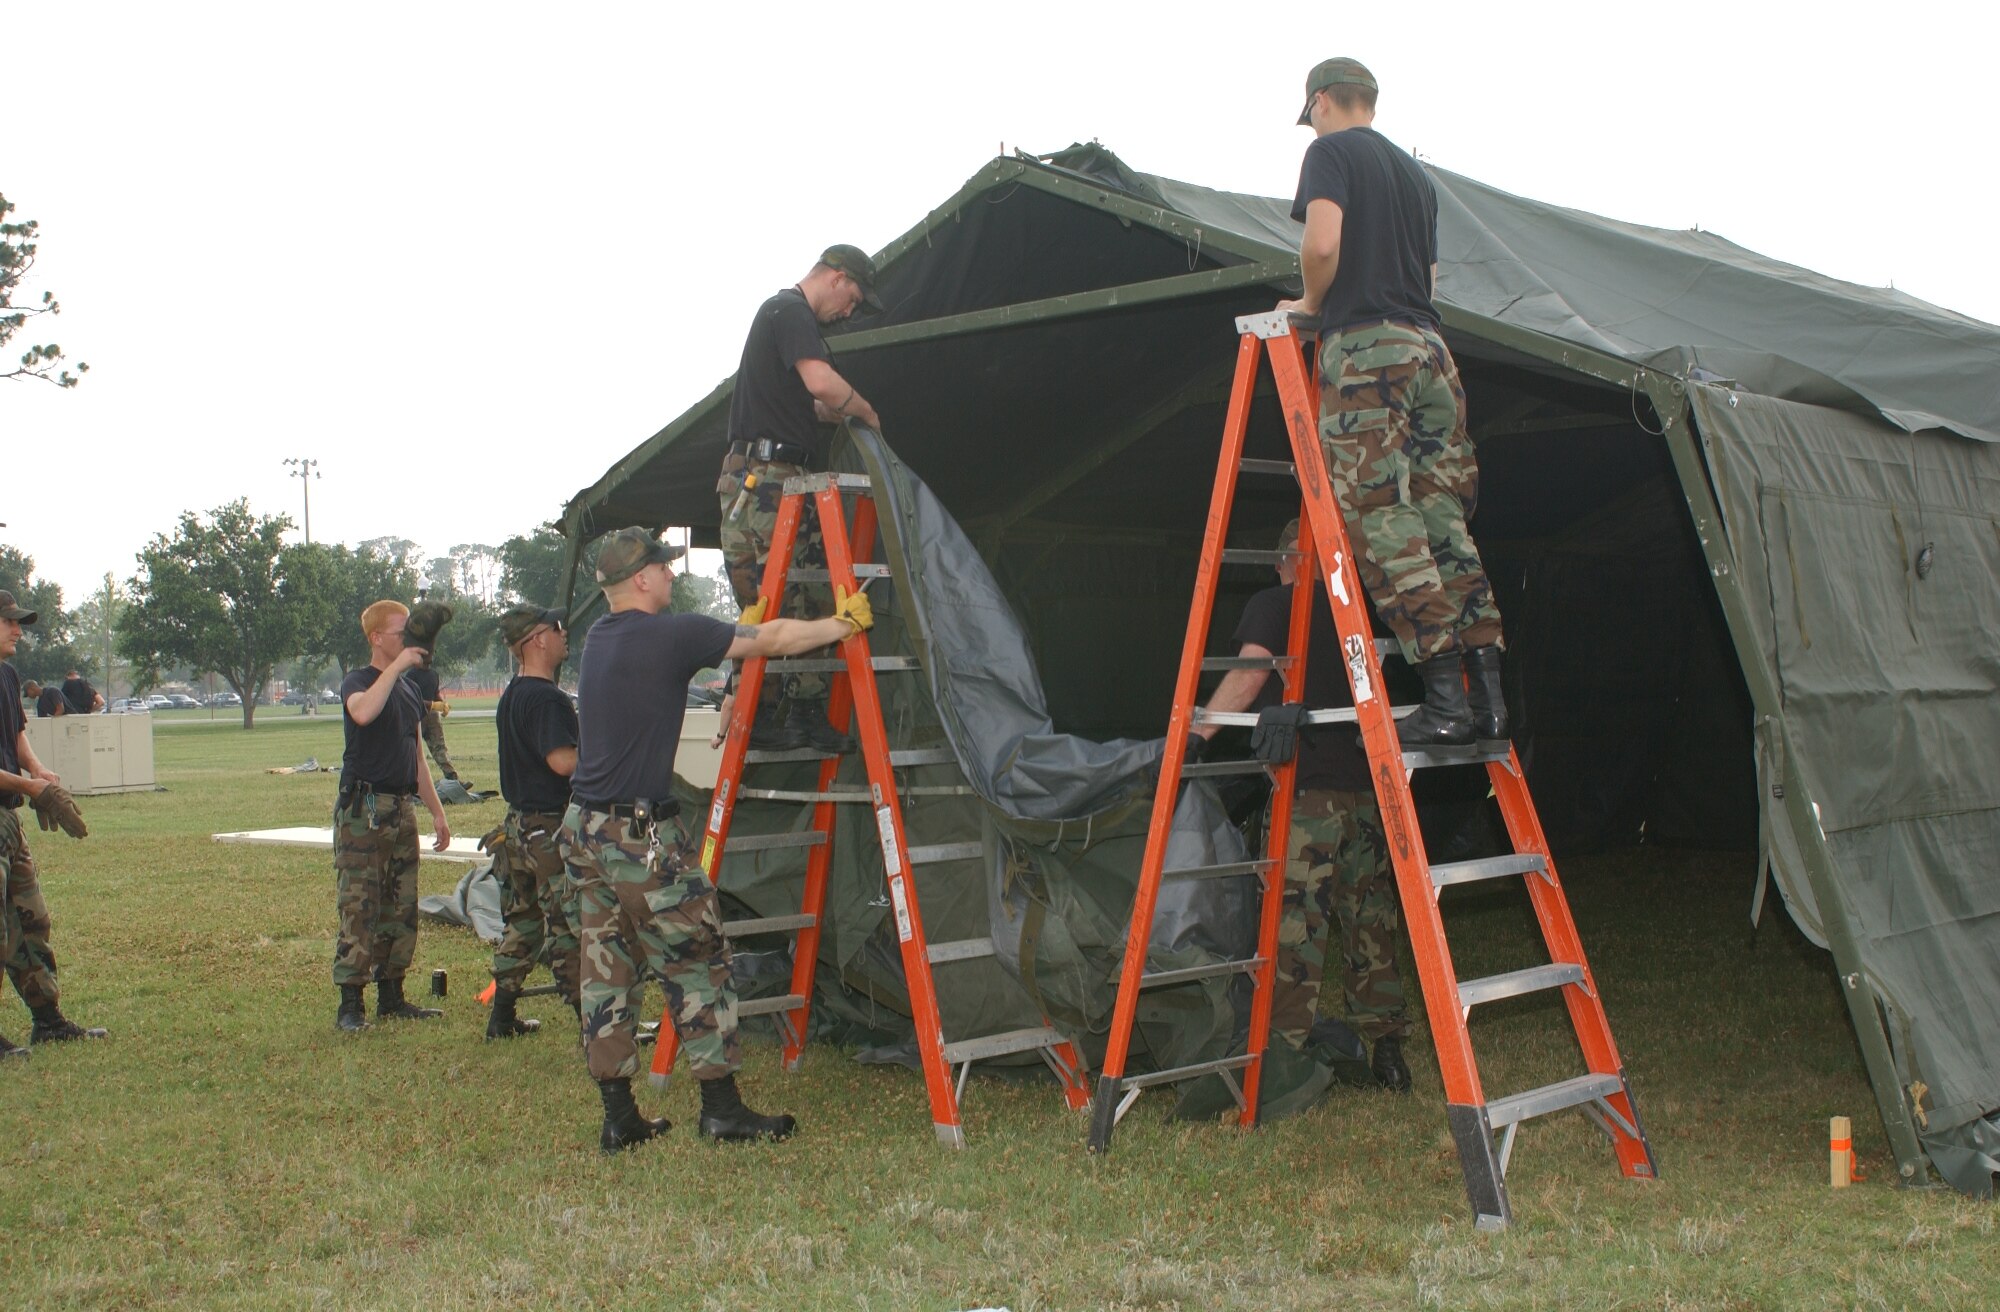 Members of the 81st Civil Engineer Squadron and 81st Services Division assemble 10 Temper tents, May 15 for next week’s exercise. (U.S. Air Force Photo by Kemberly Groue)